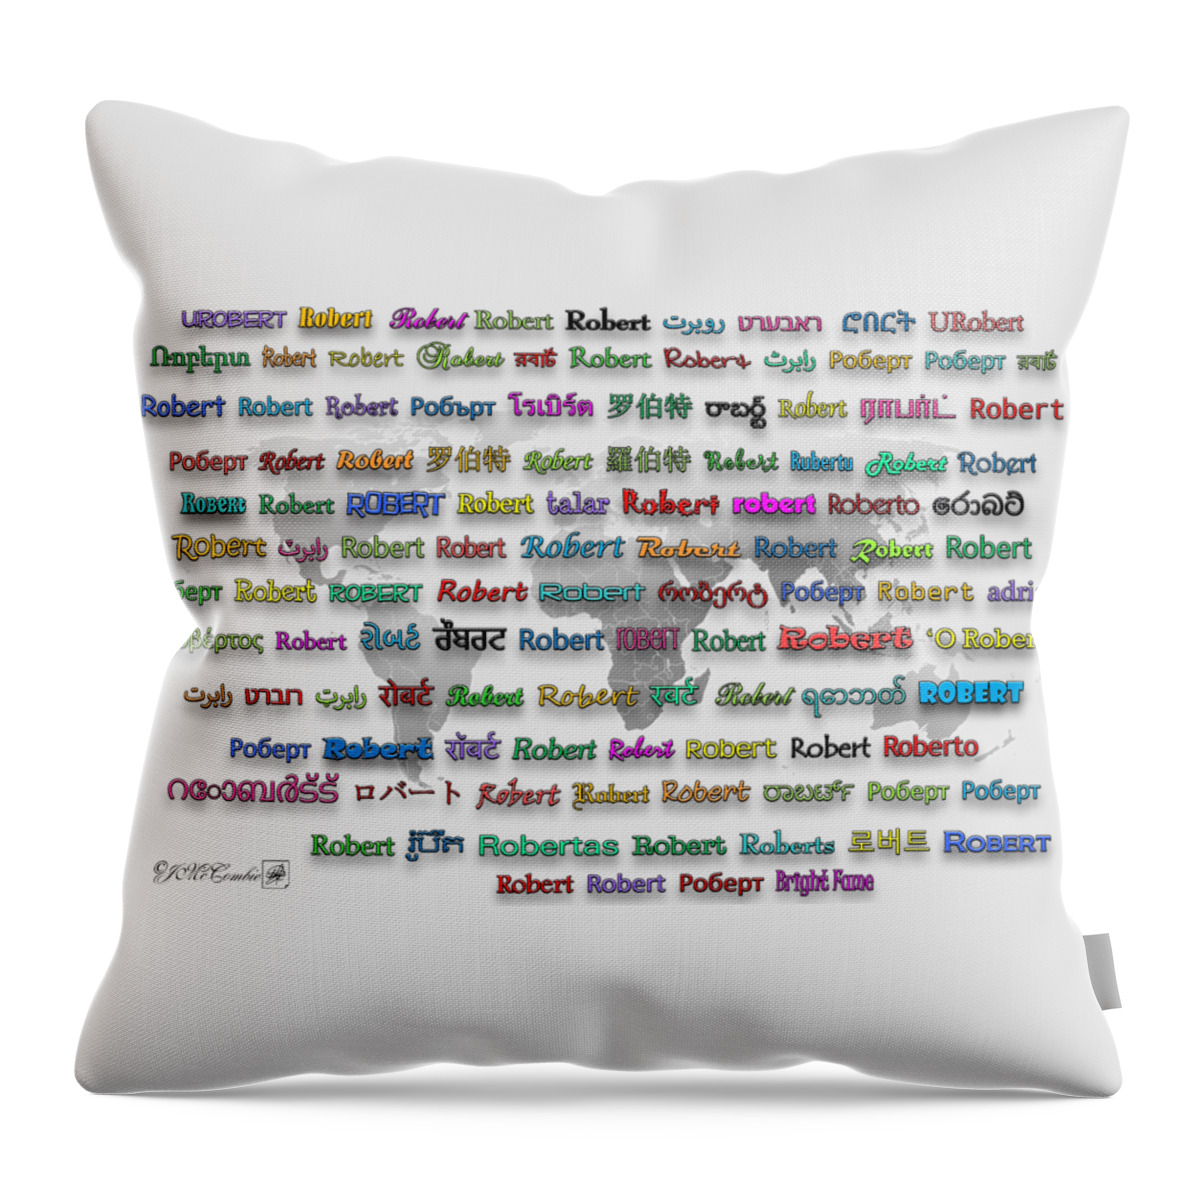 Mccombie Throw Pillow featuring the digital art Robert by J McCombie